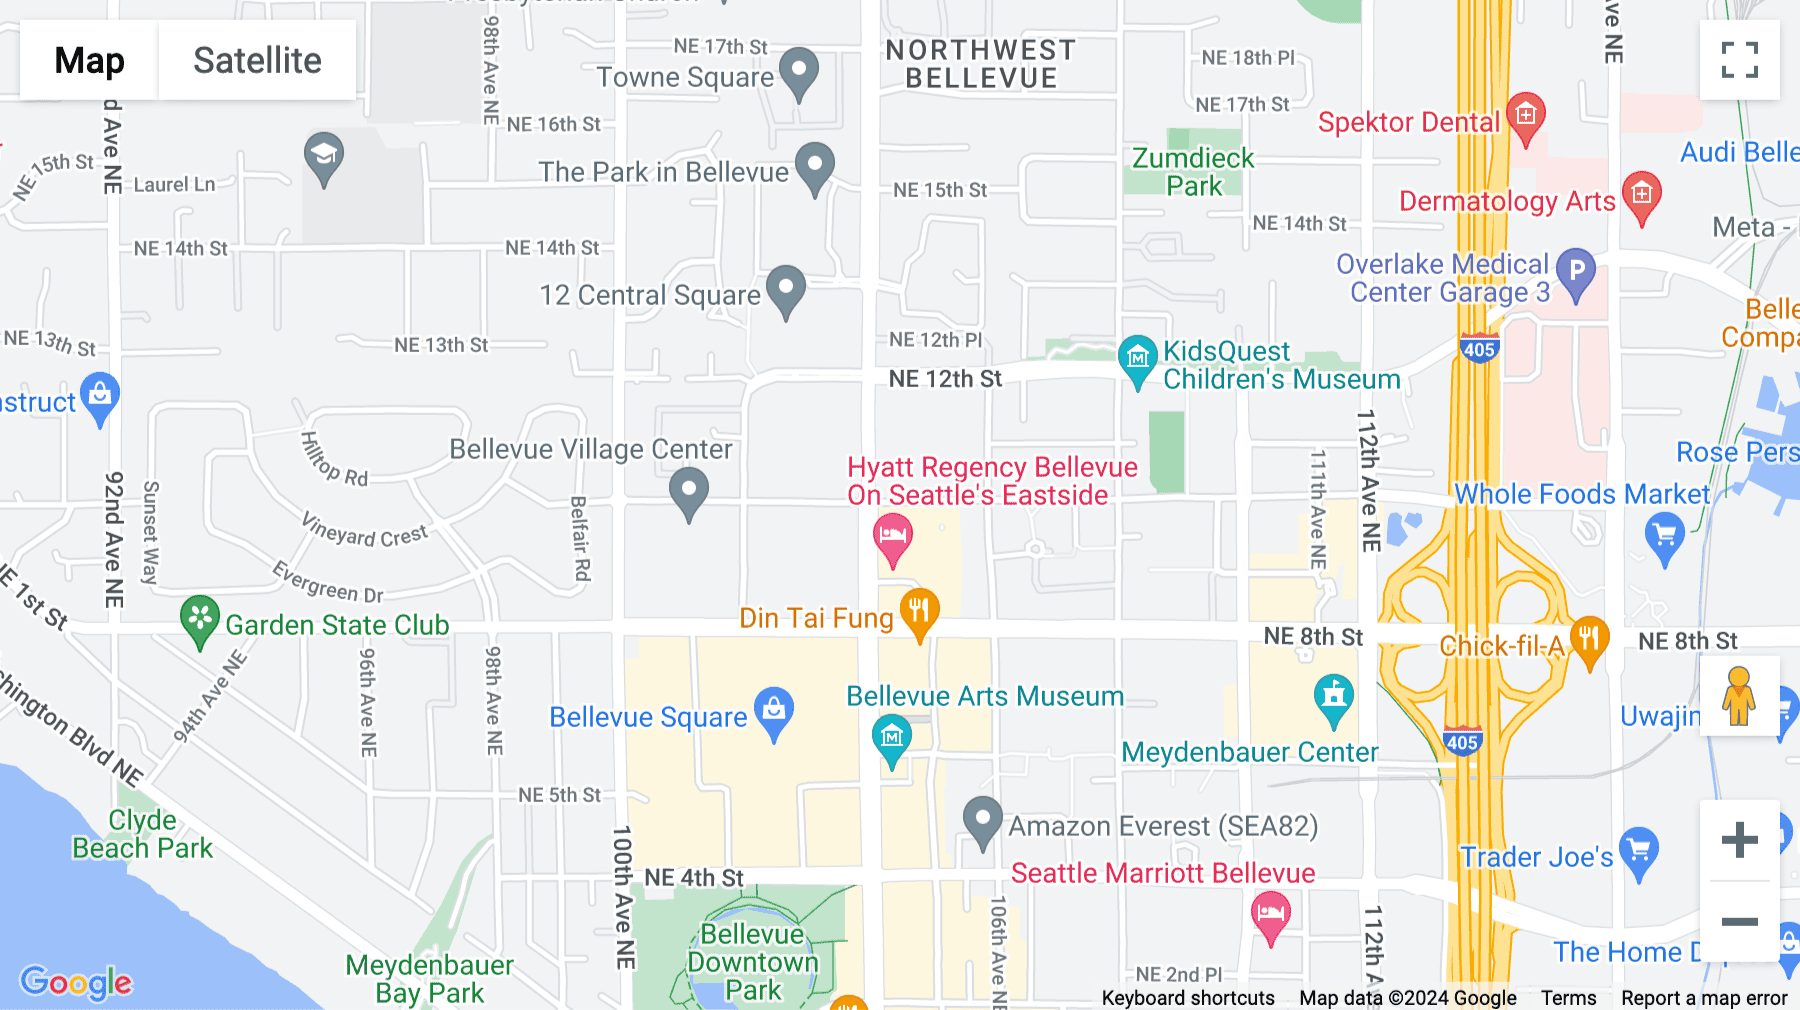 Click for interative map of 10900 North East 4th Street, Suite 2300, Skyline Tower, Bellevue